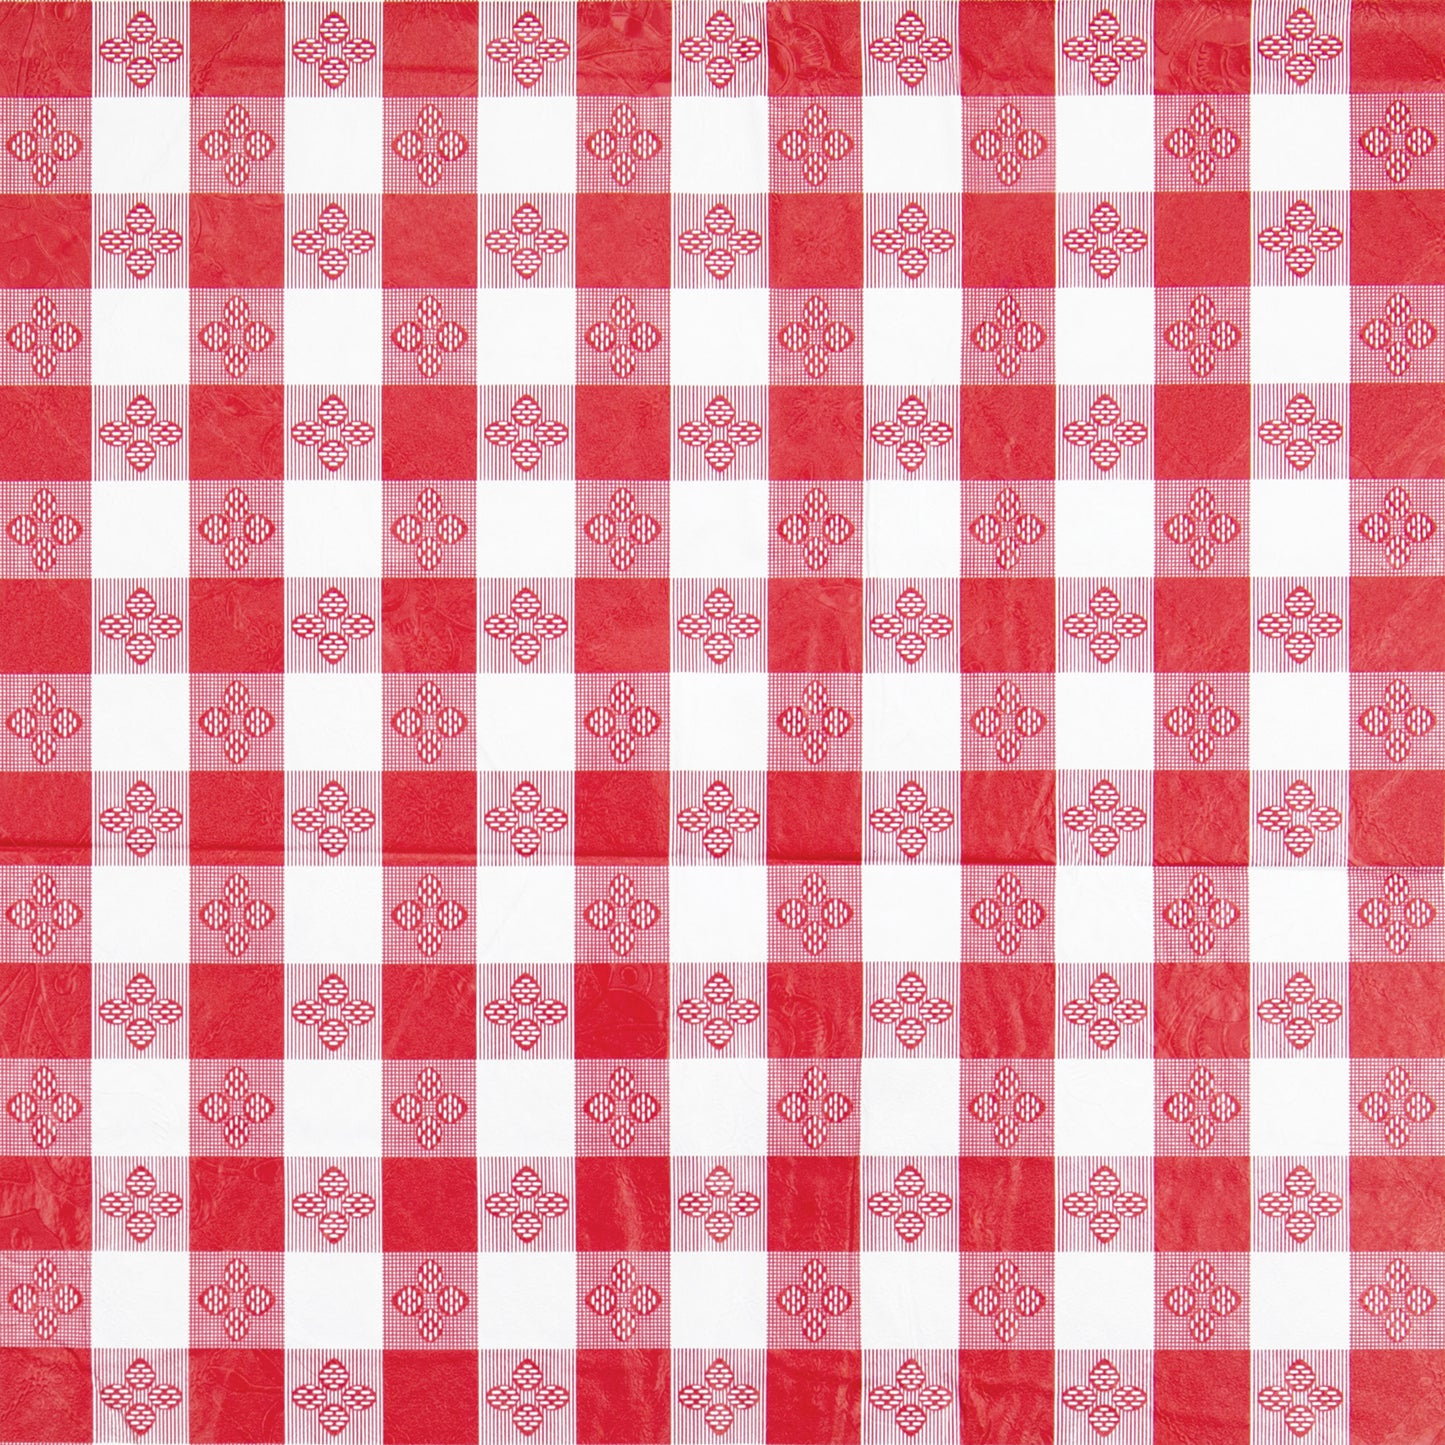 TBCO-90R - Table Cloth, Rectangle - Red, 52" x 90"